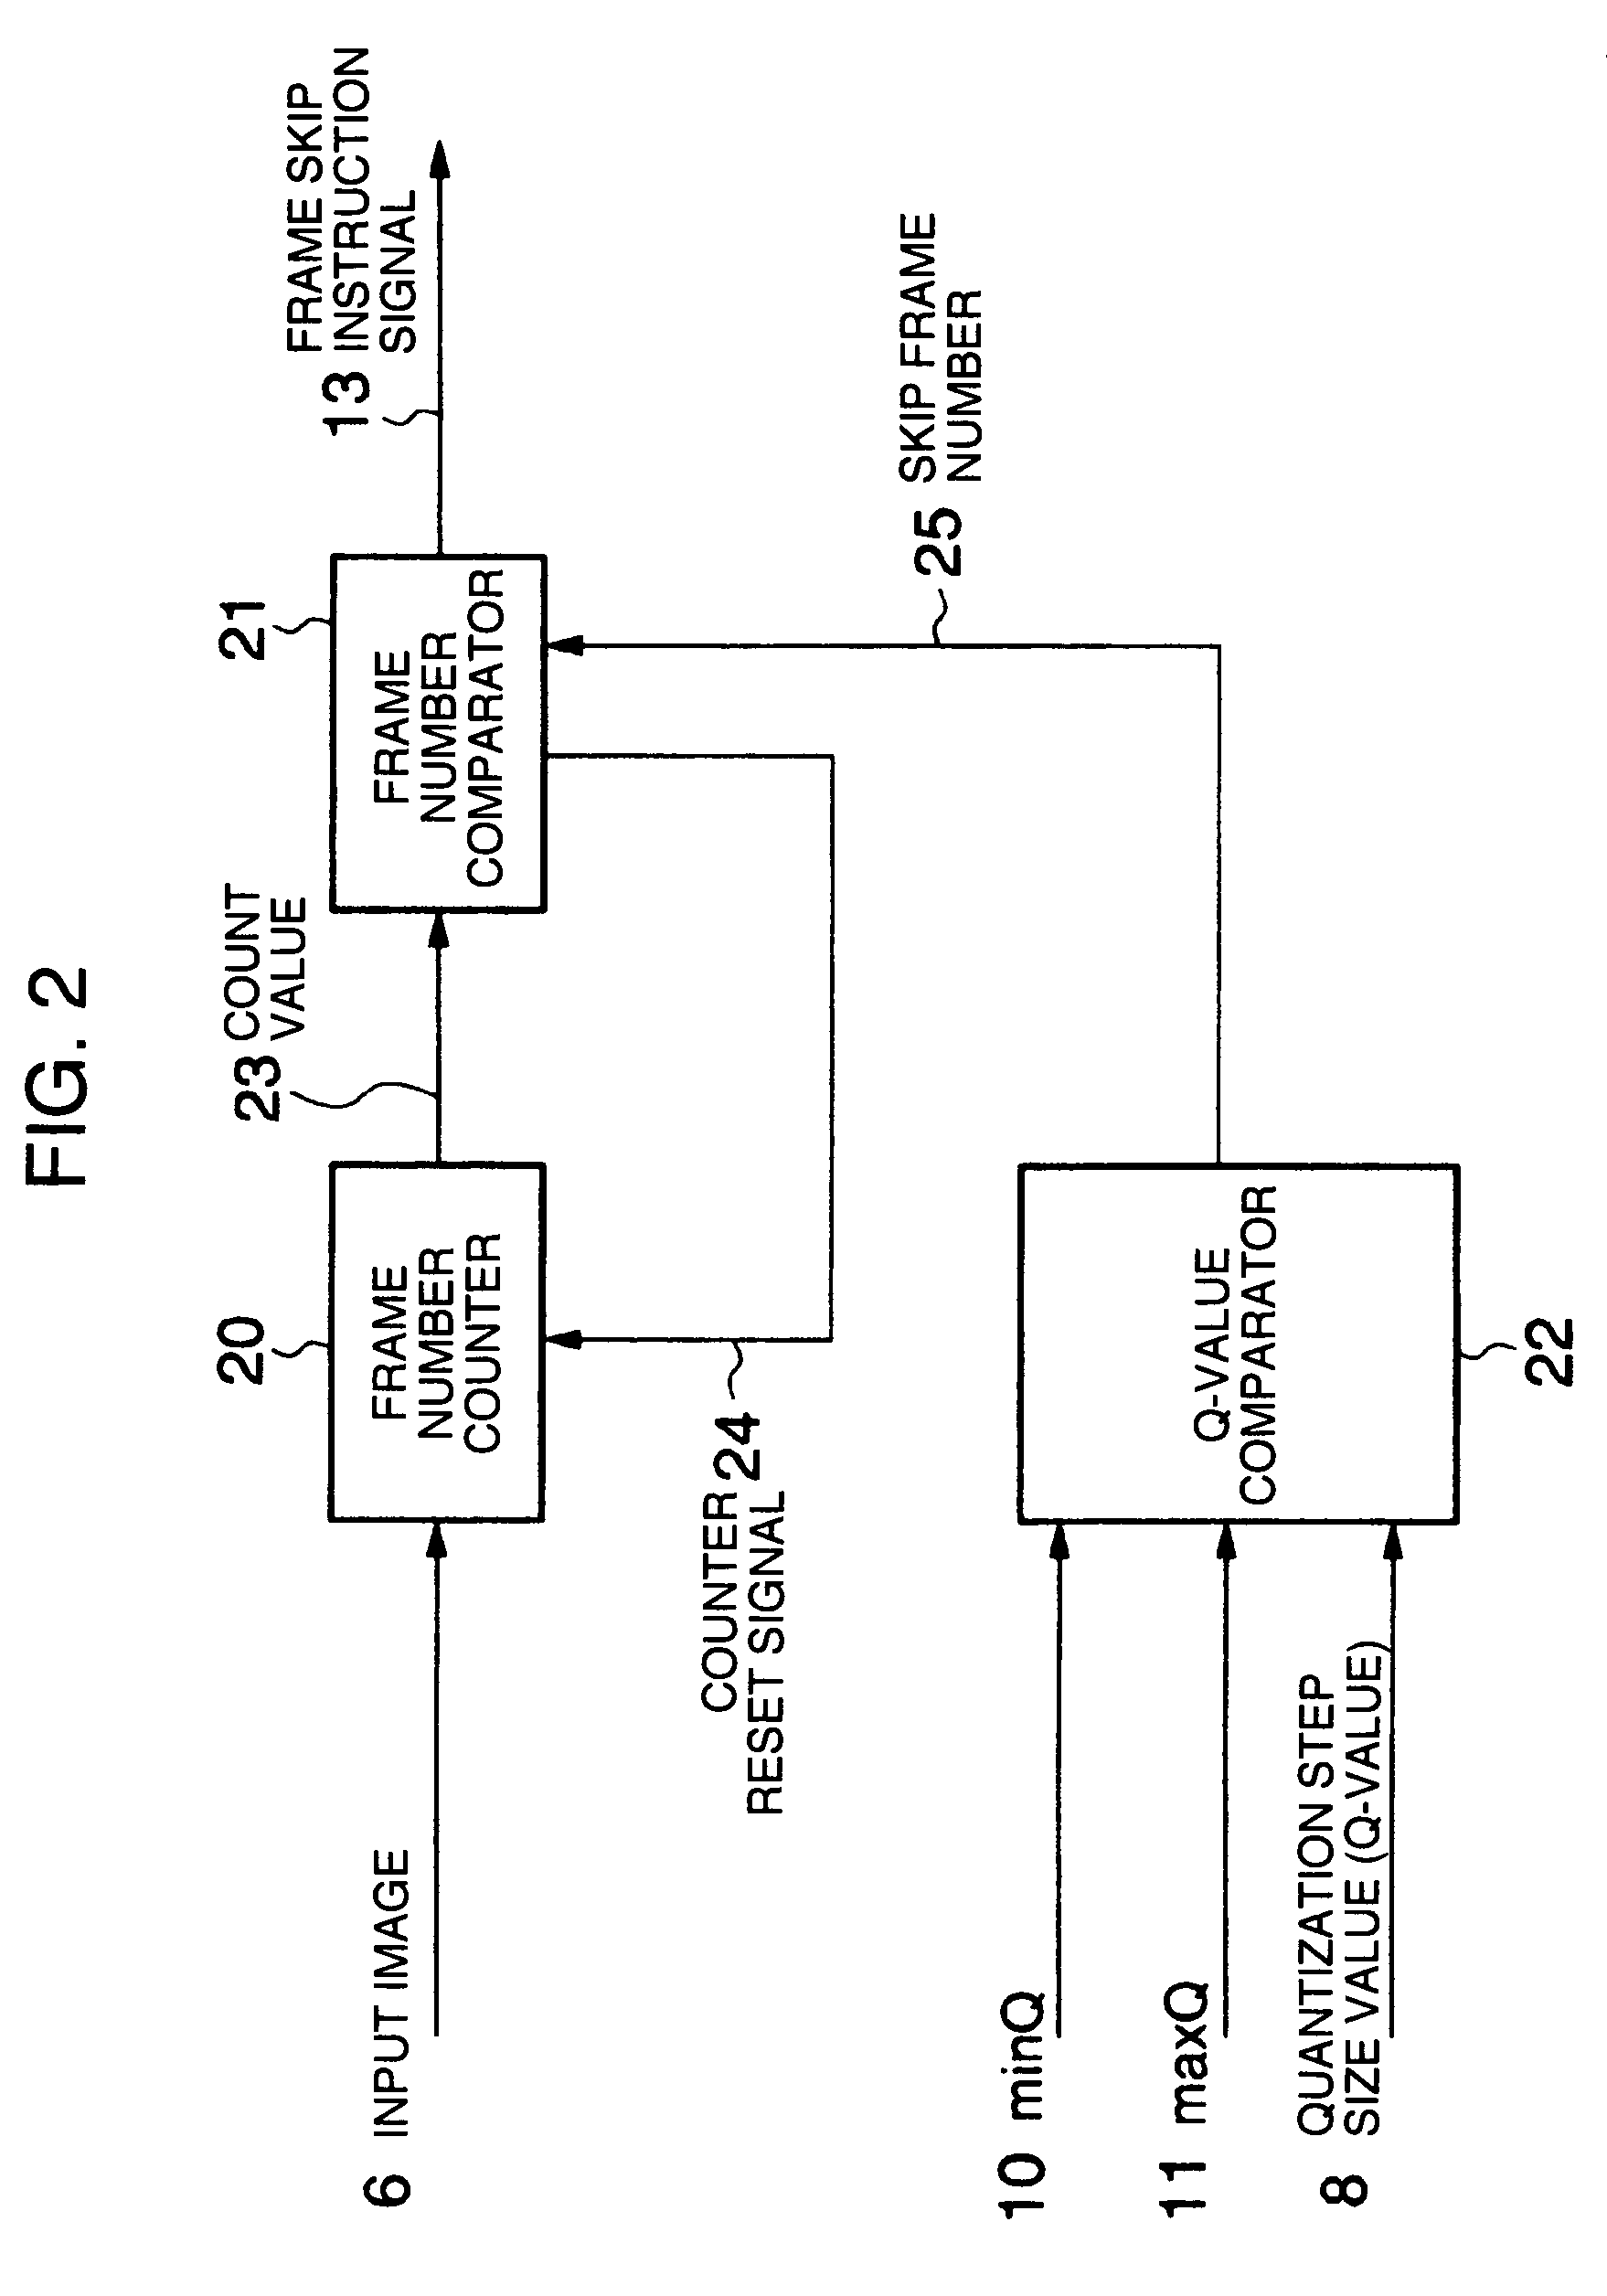 Method and apparatus for compressing image data